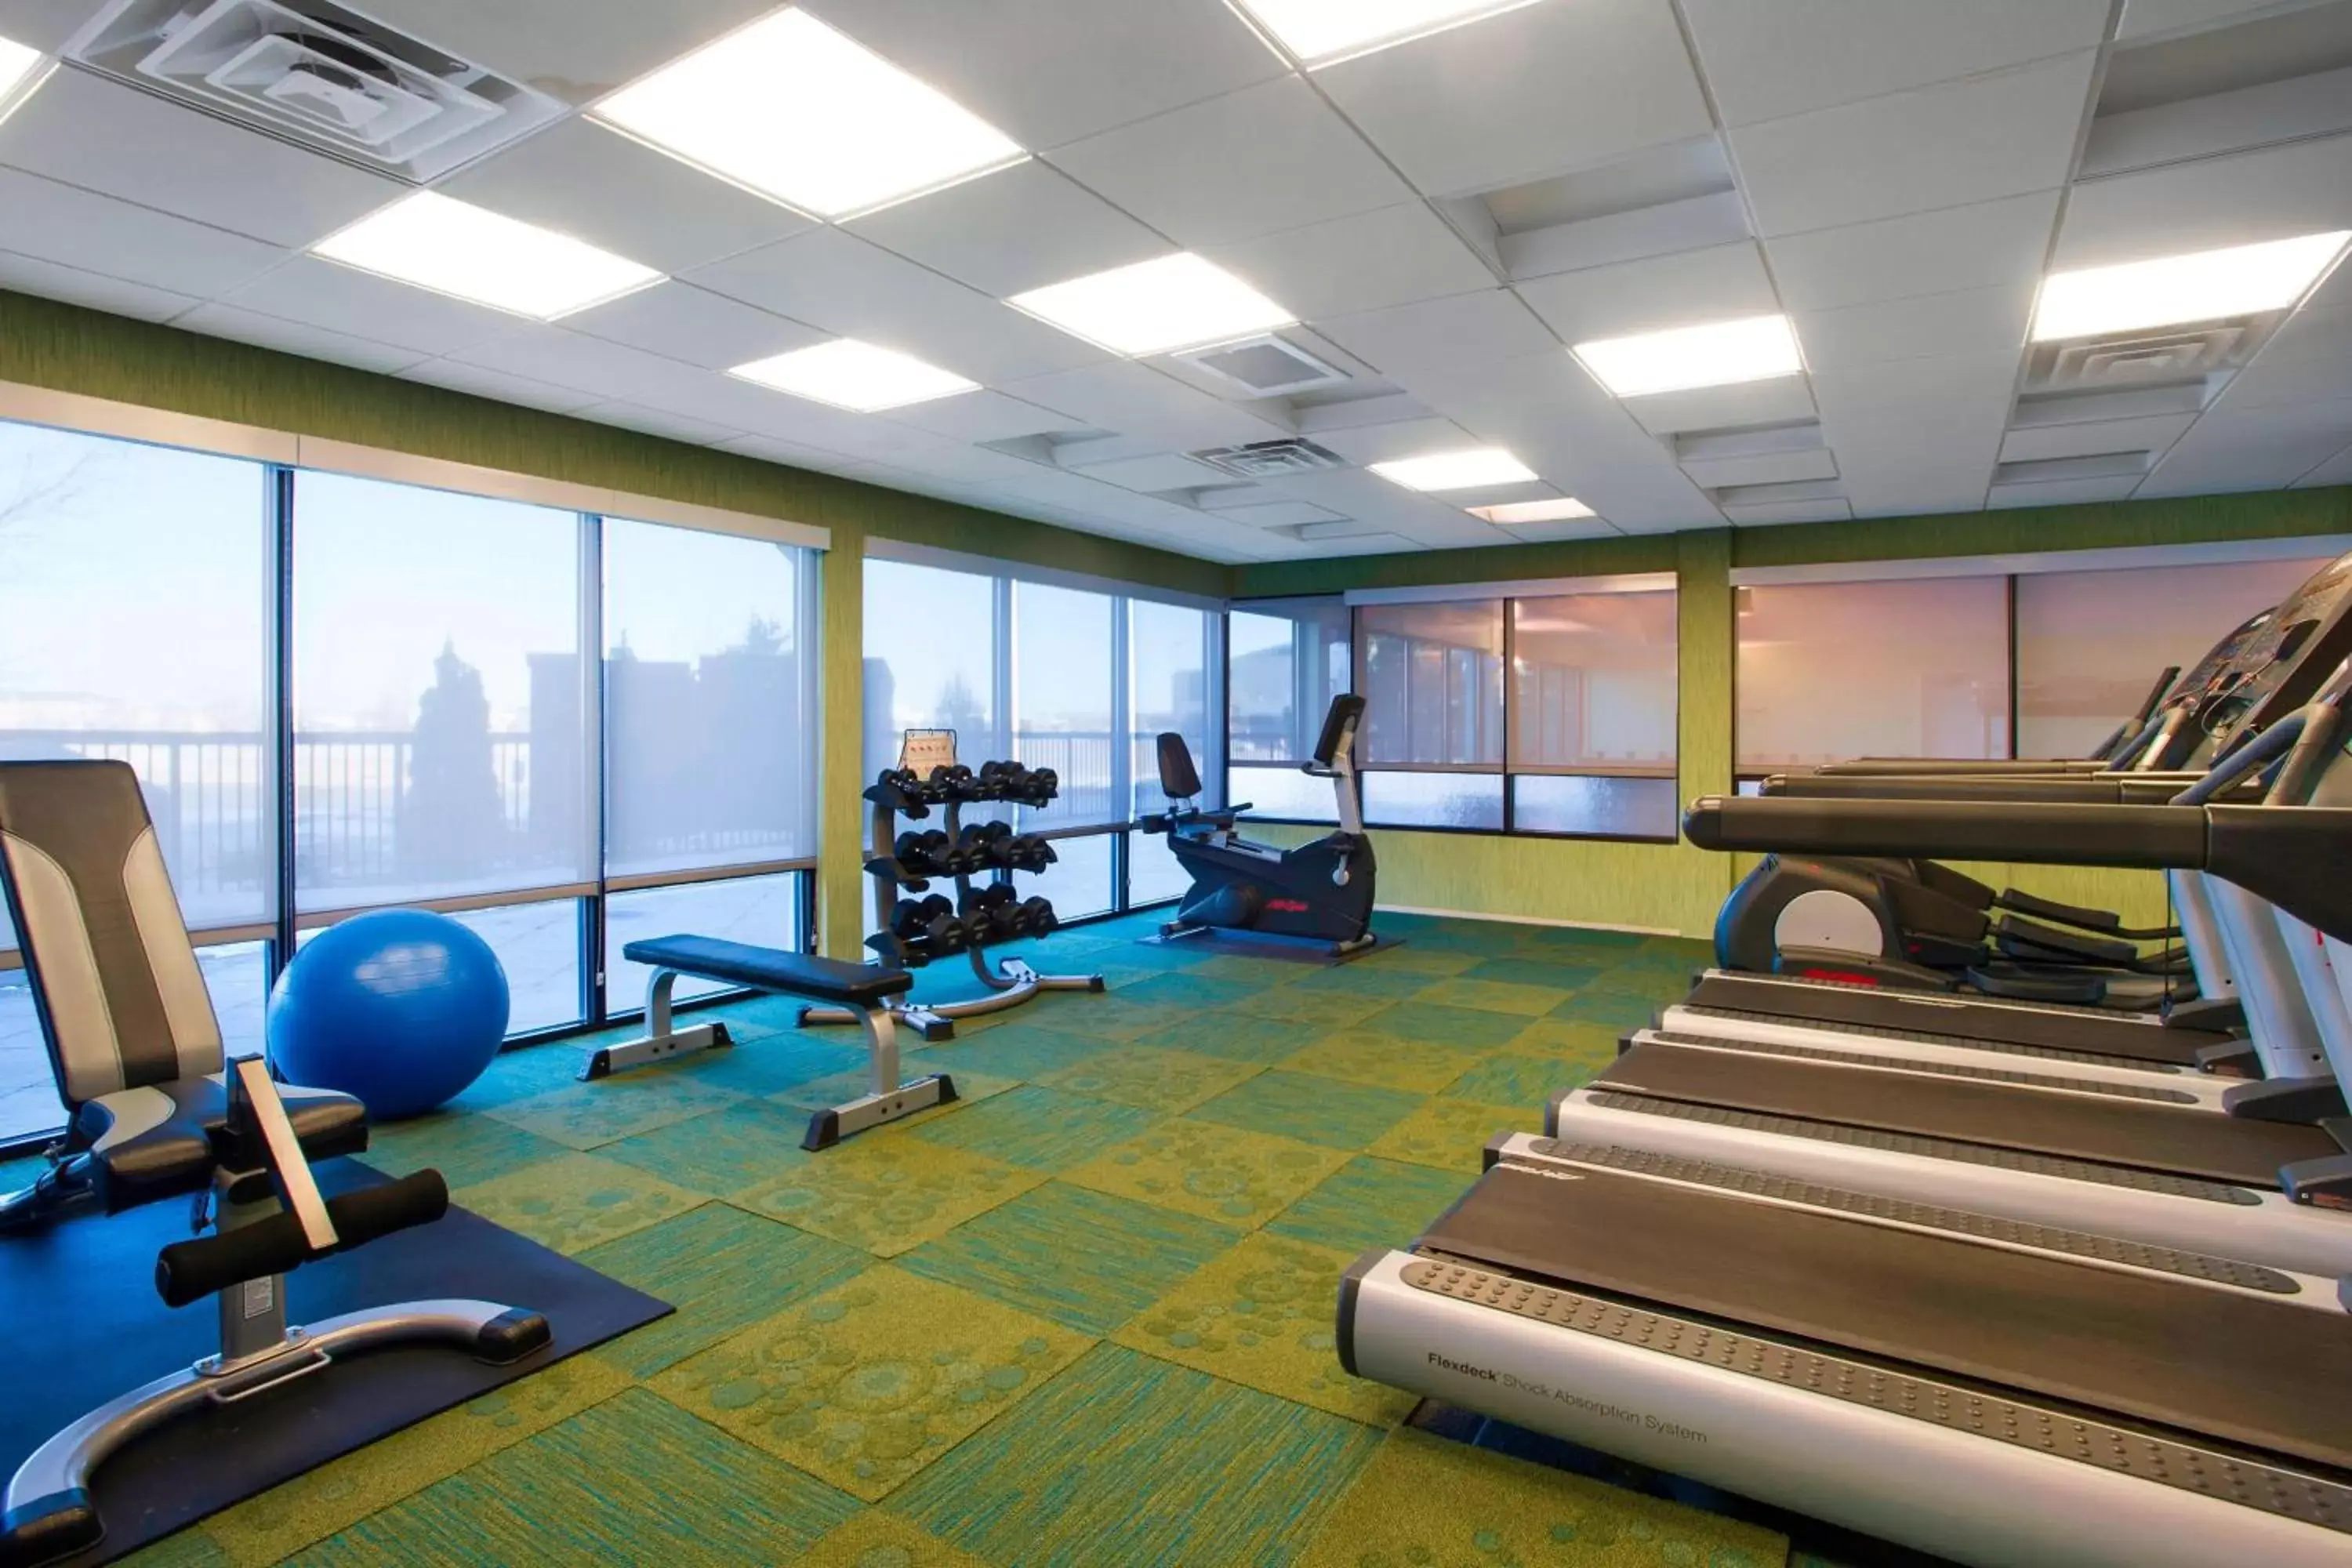 Fitness centre/facilities, Fitness Center/Facilities in SpringHill Suites by Marriott Omaha East, Council Bluffs, IA